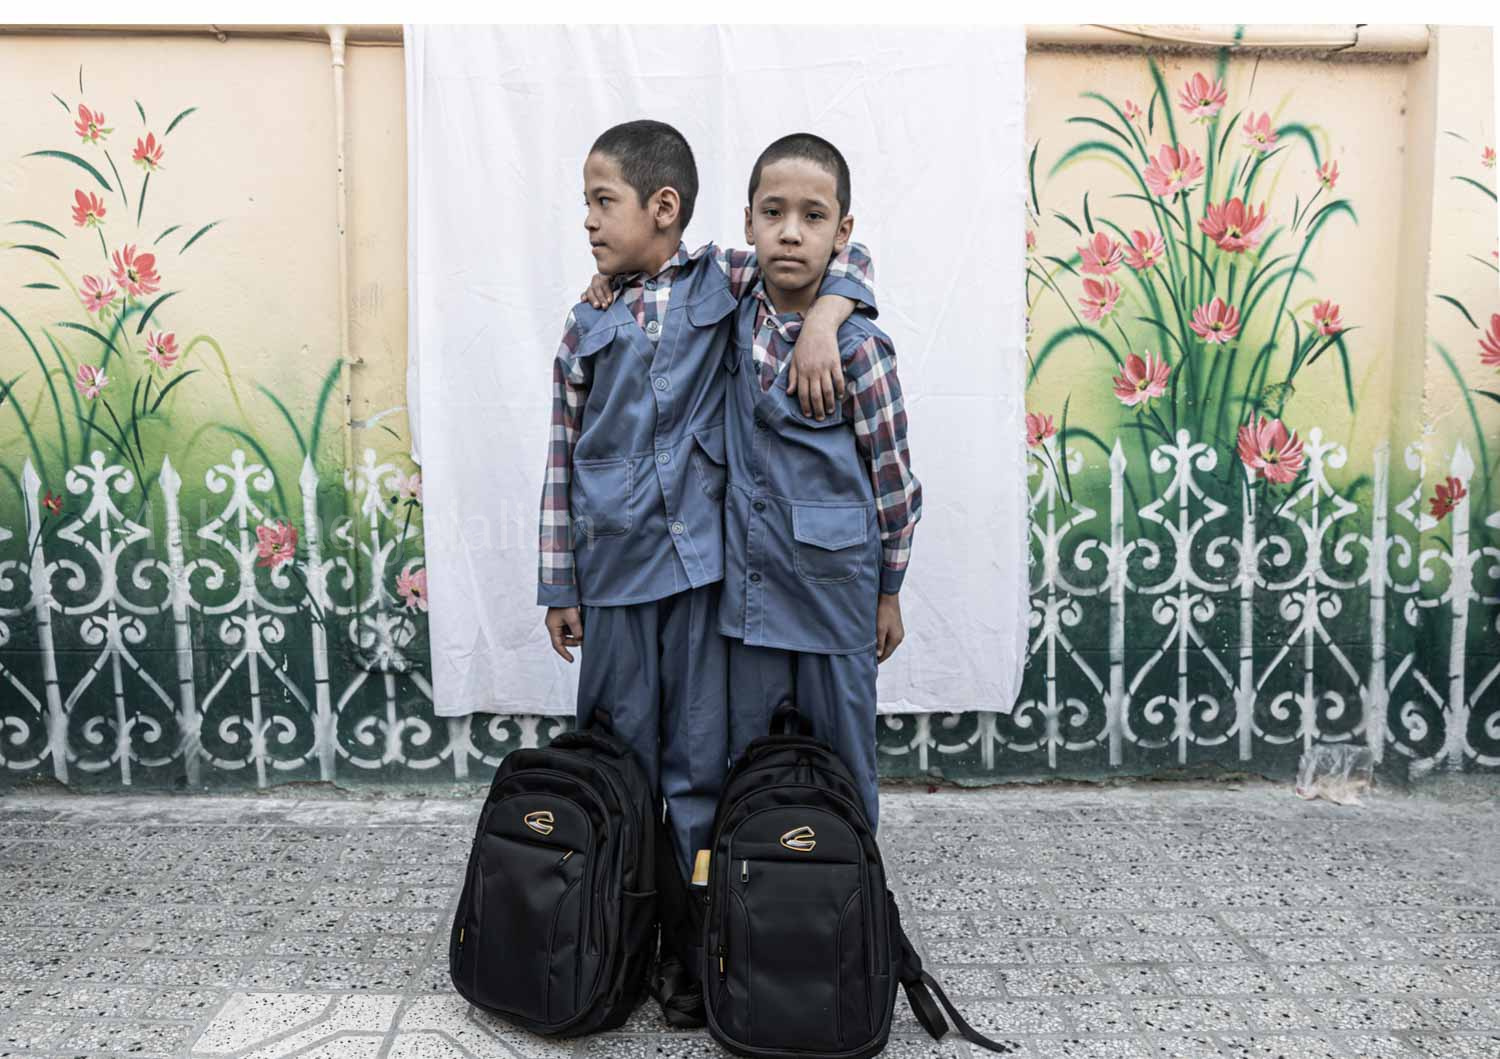 Aliasghar 10-yeaar-old and Mohammadfayaz 8-year-old moved 7 months ago from dashtbarchi, Kabul, Afghanistan.